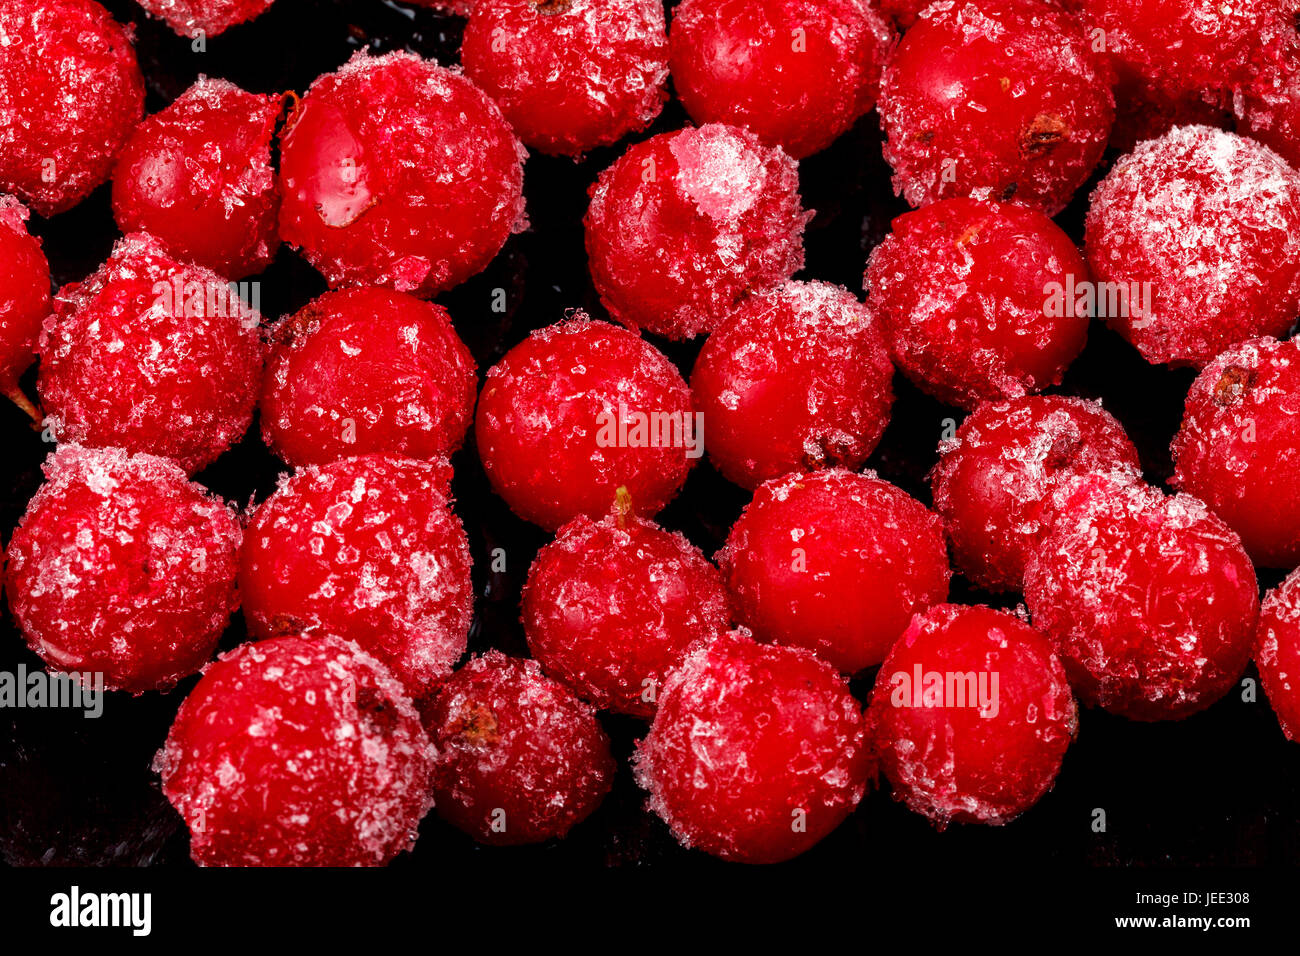 Frozen berries of red currants on a dark background. Close-up Stock Photo